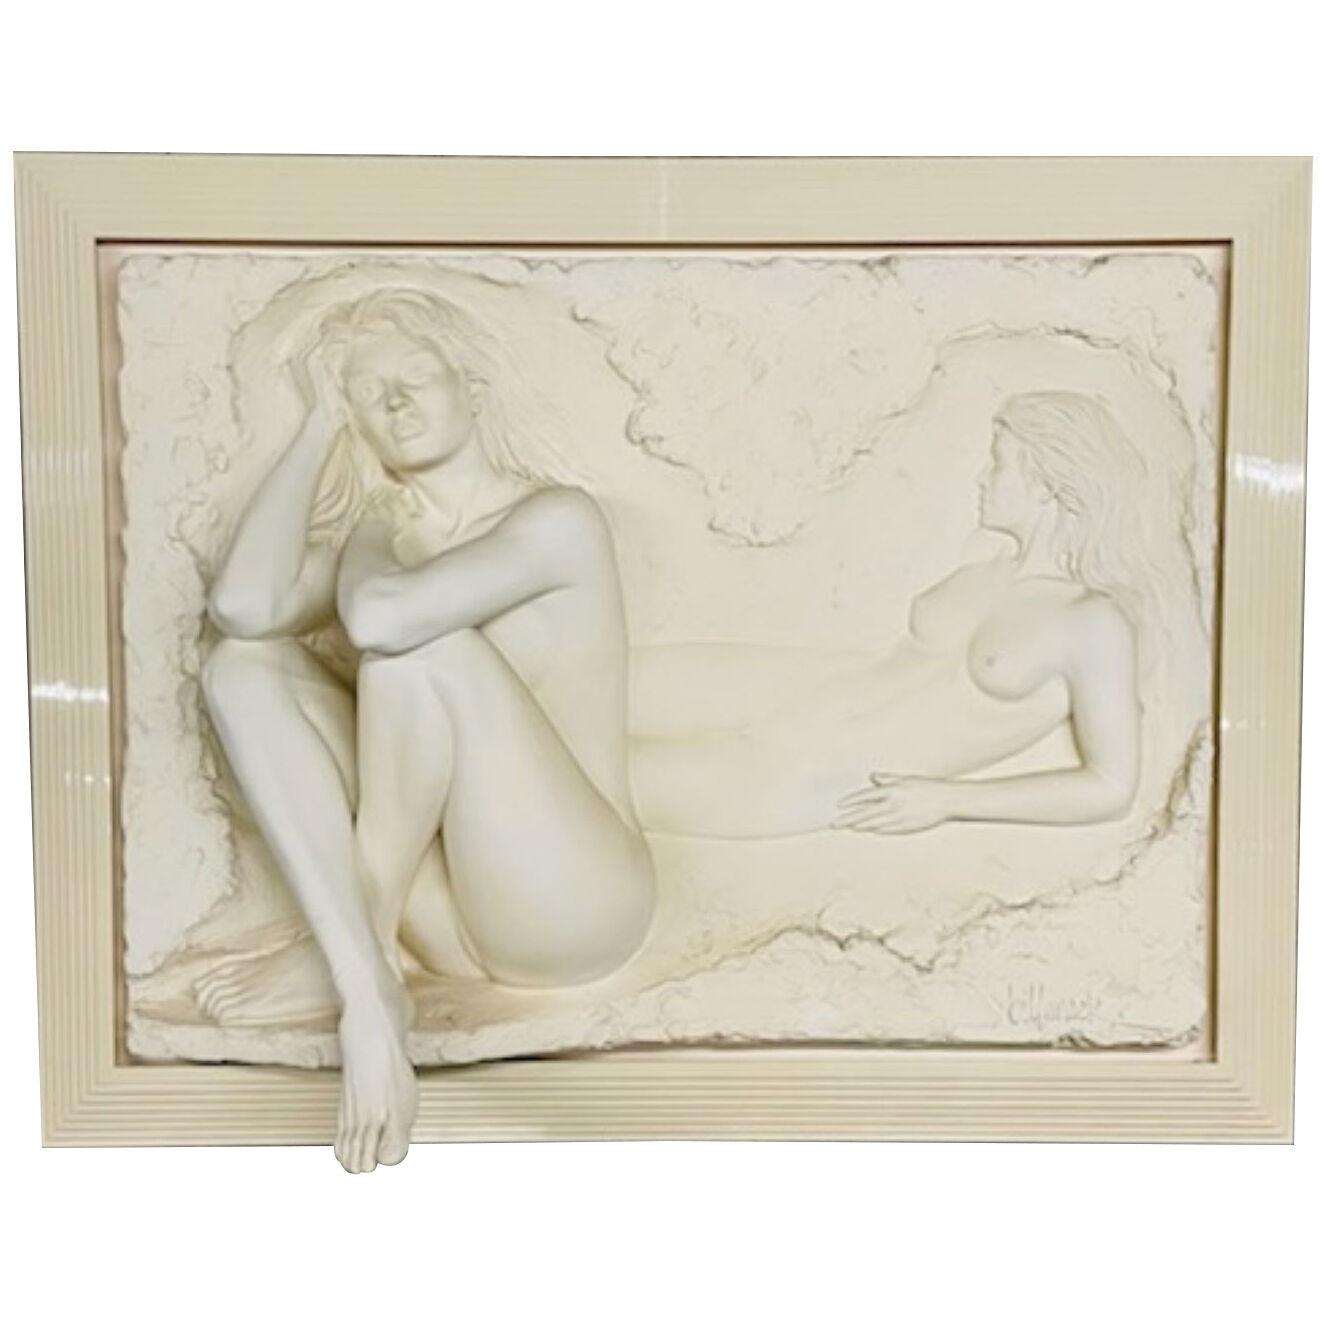 Bill Mack 3D Figural Wall Sculpture, "Reflection", Monumental in Size, Nude